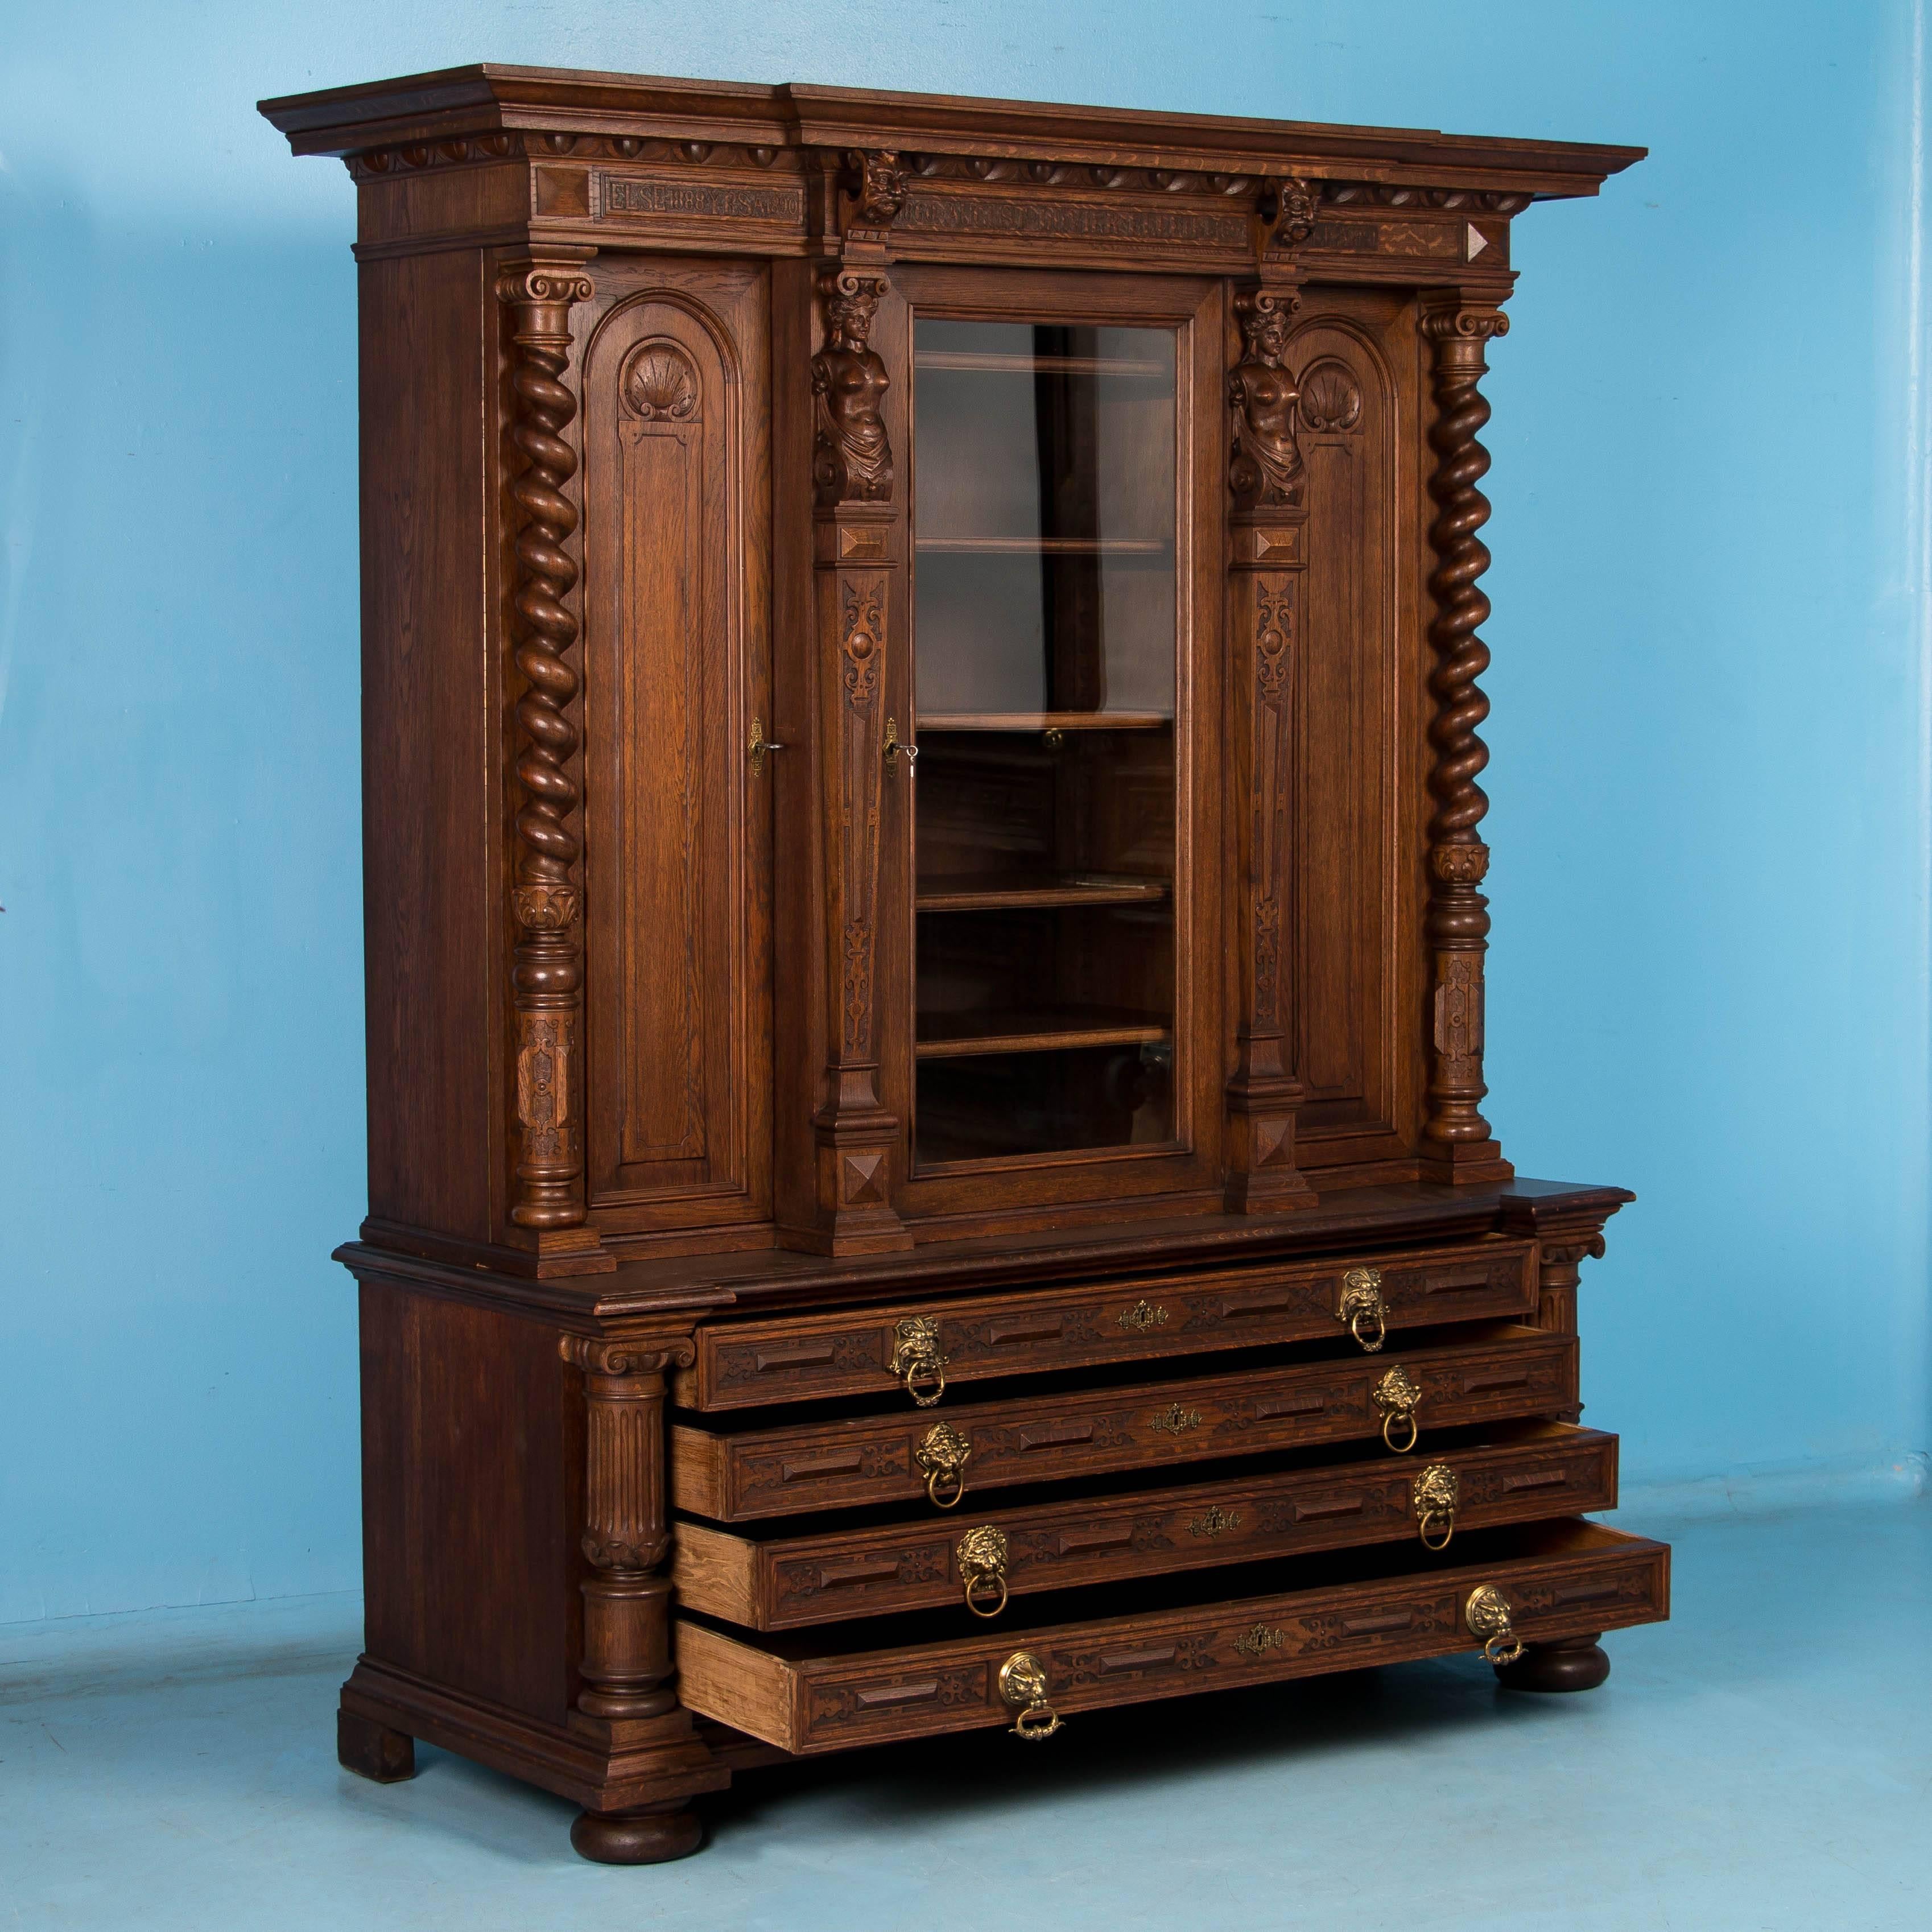 Impressive and statuesque, this extraordinary three door oak bookcase has hand carved columns and figureheads among its many elaborate features. The most notable carved elements are found in the crown where the family name Duvier is flanked by the